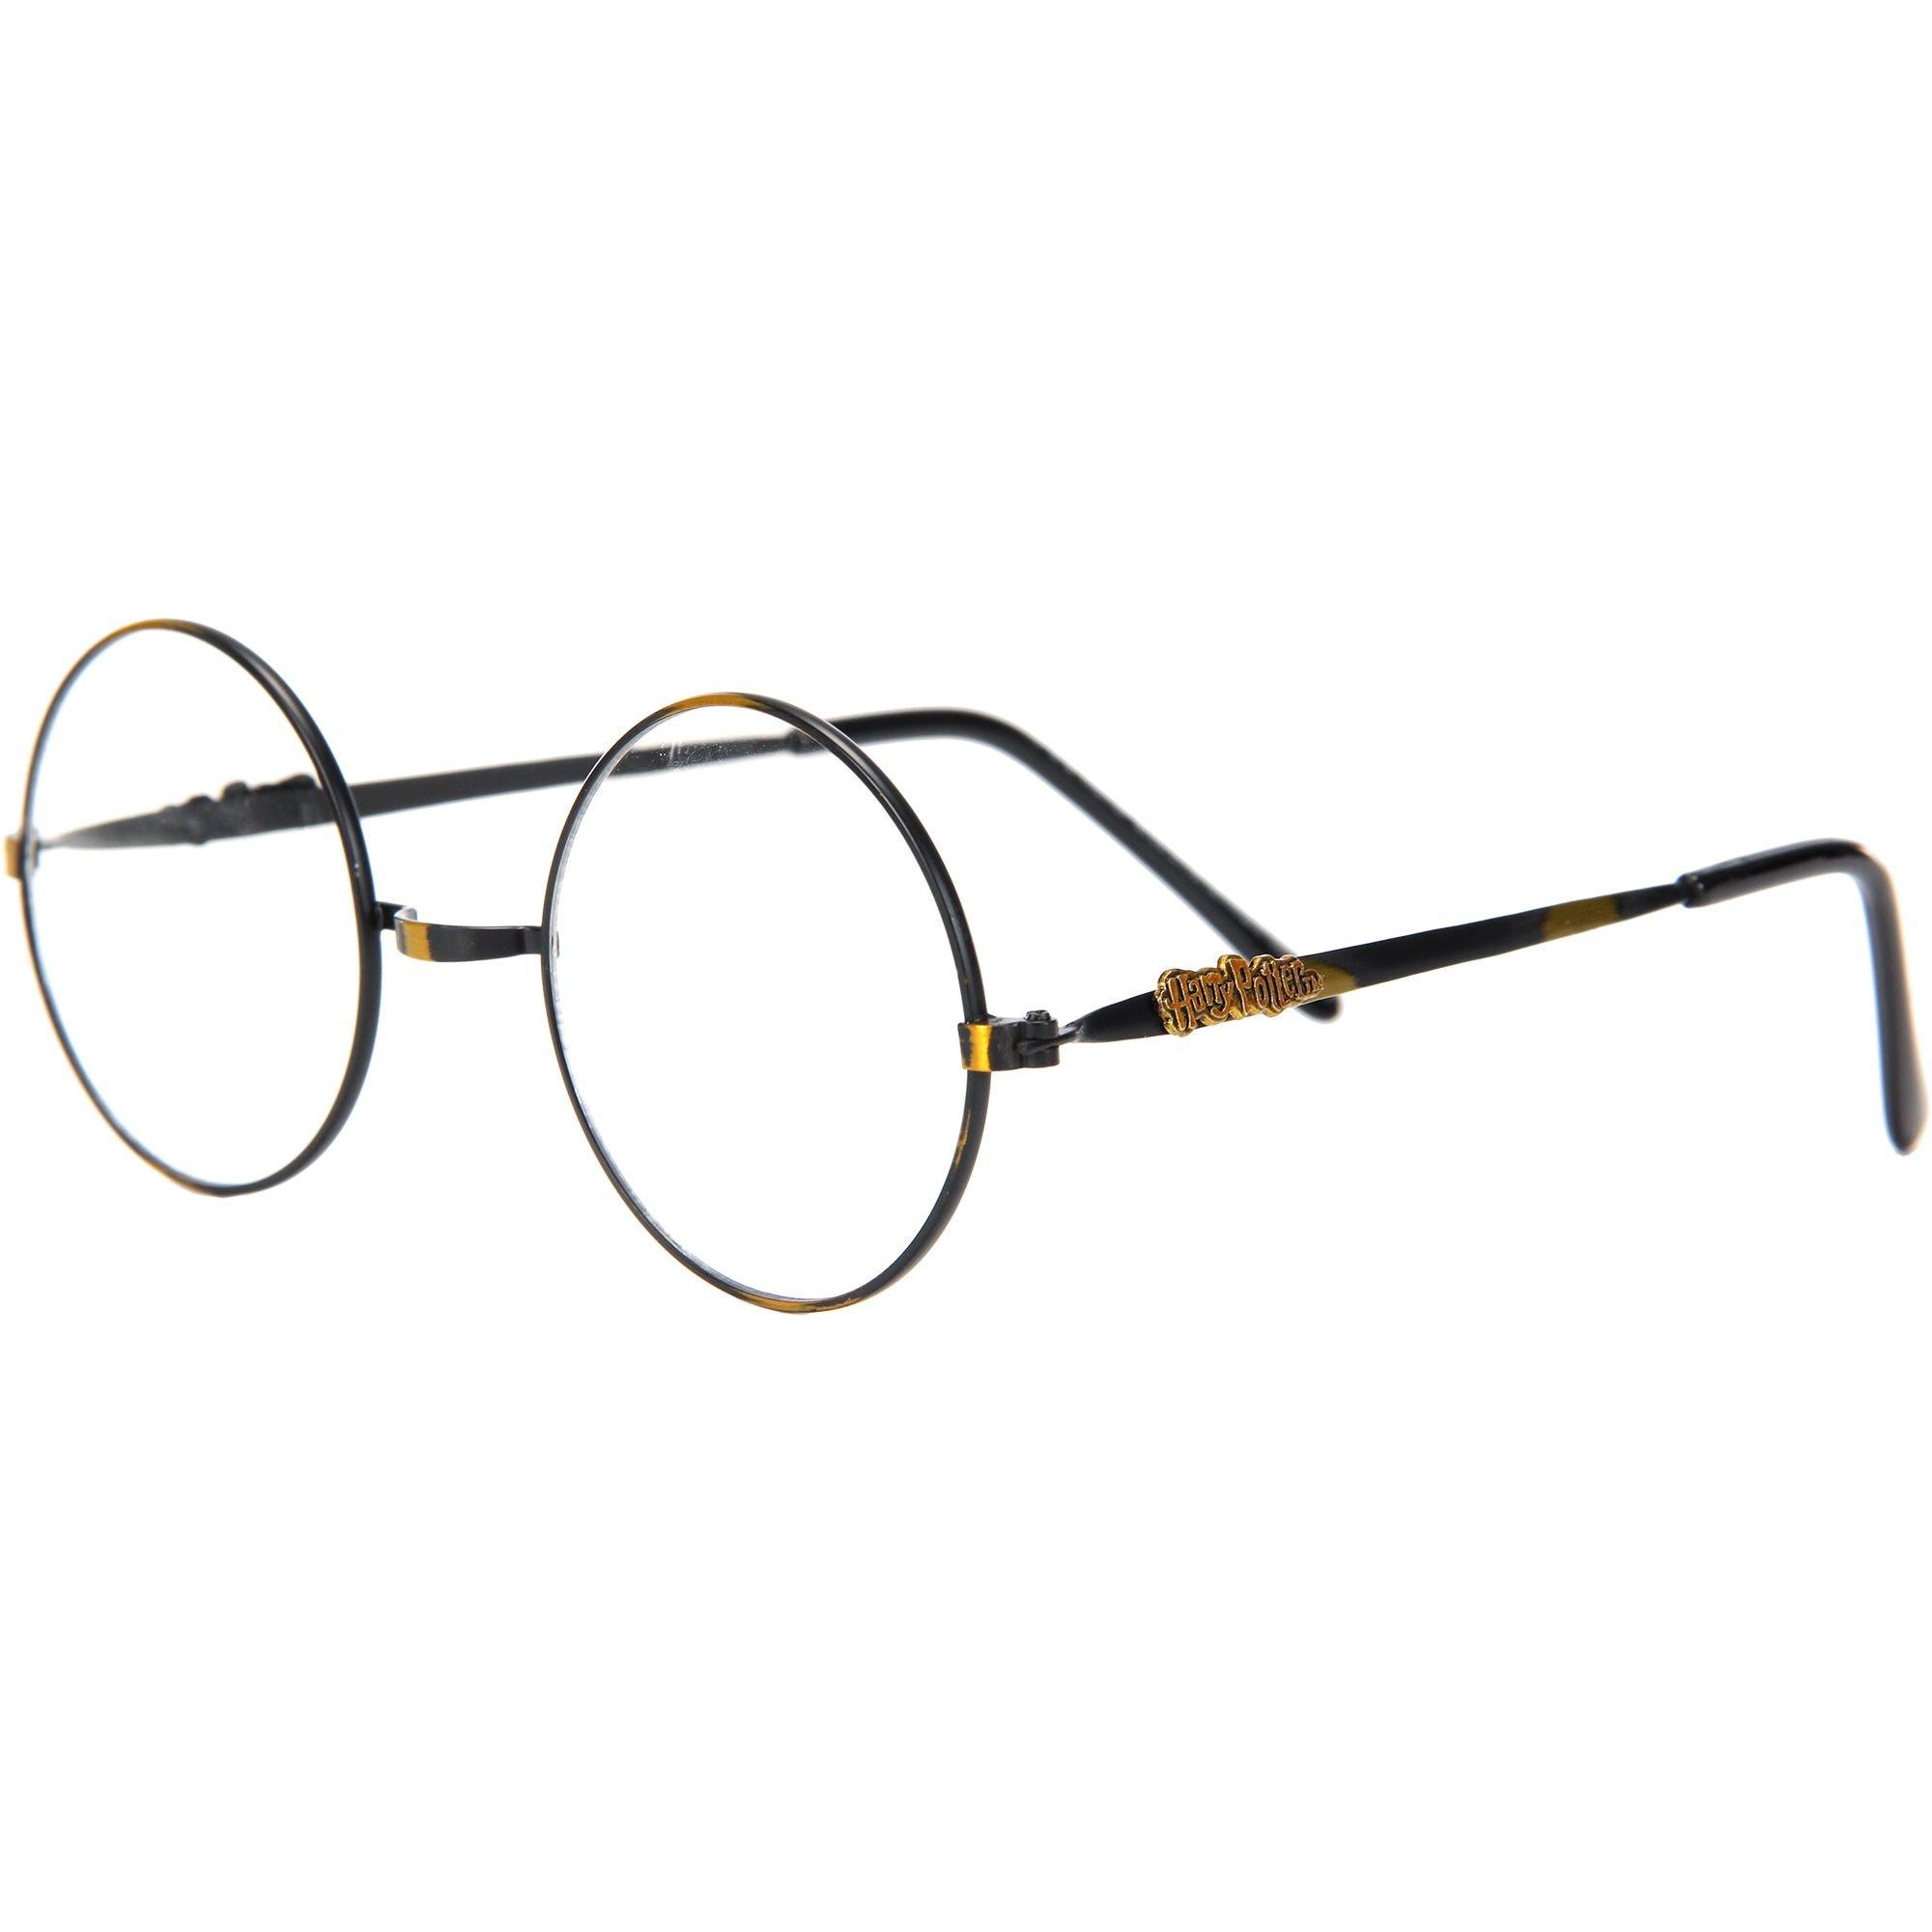 Round Wire Harry Potter Glasses - Harry Potter